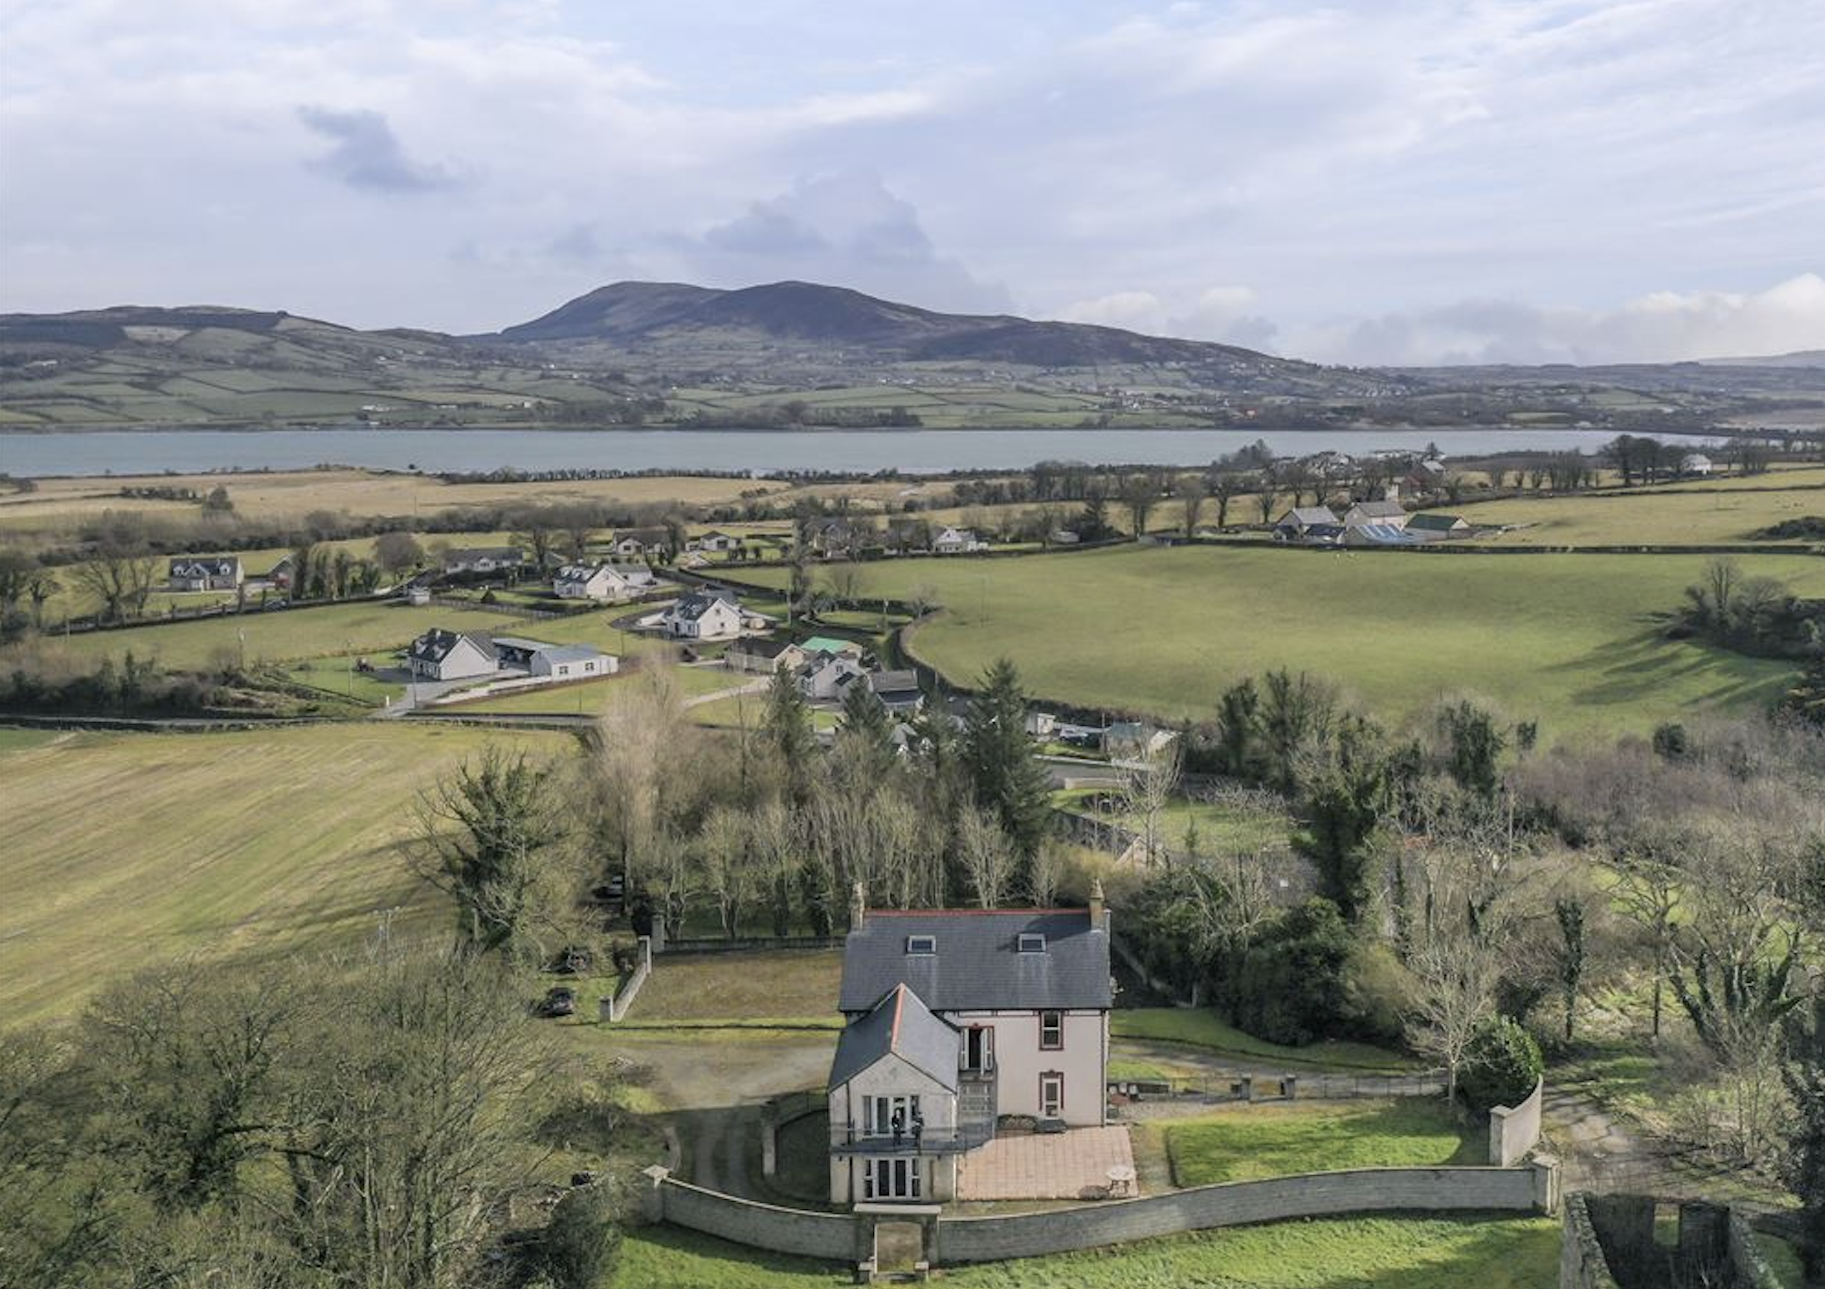 Here's what €500k gets you in Donegal - a wine cellar, tennis court and 3 acre estate